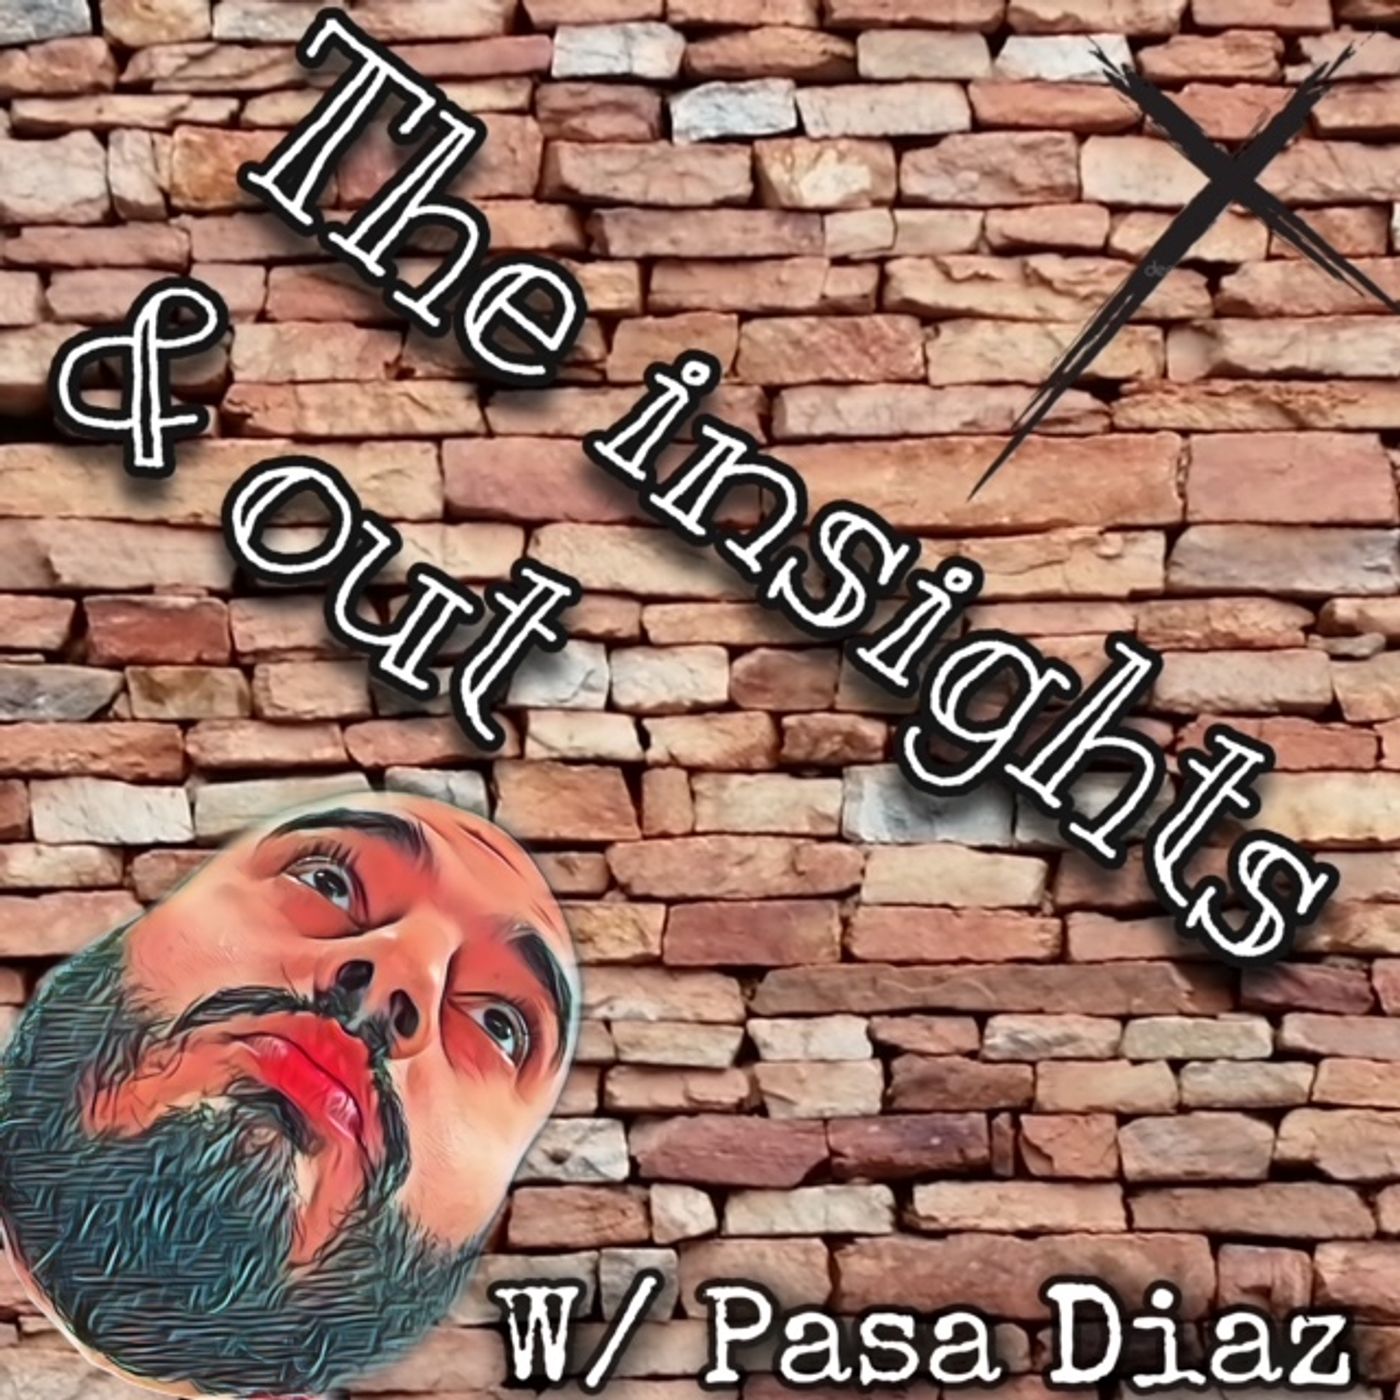 The insights and out Podcast episode 2 The body of Christ